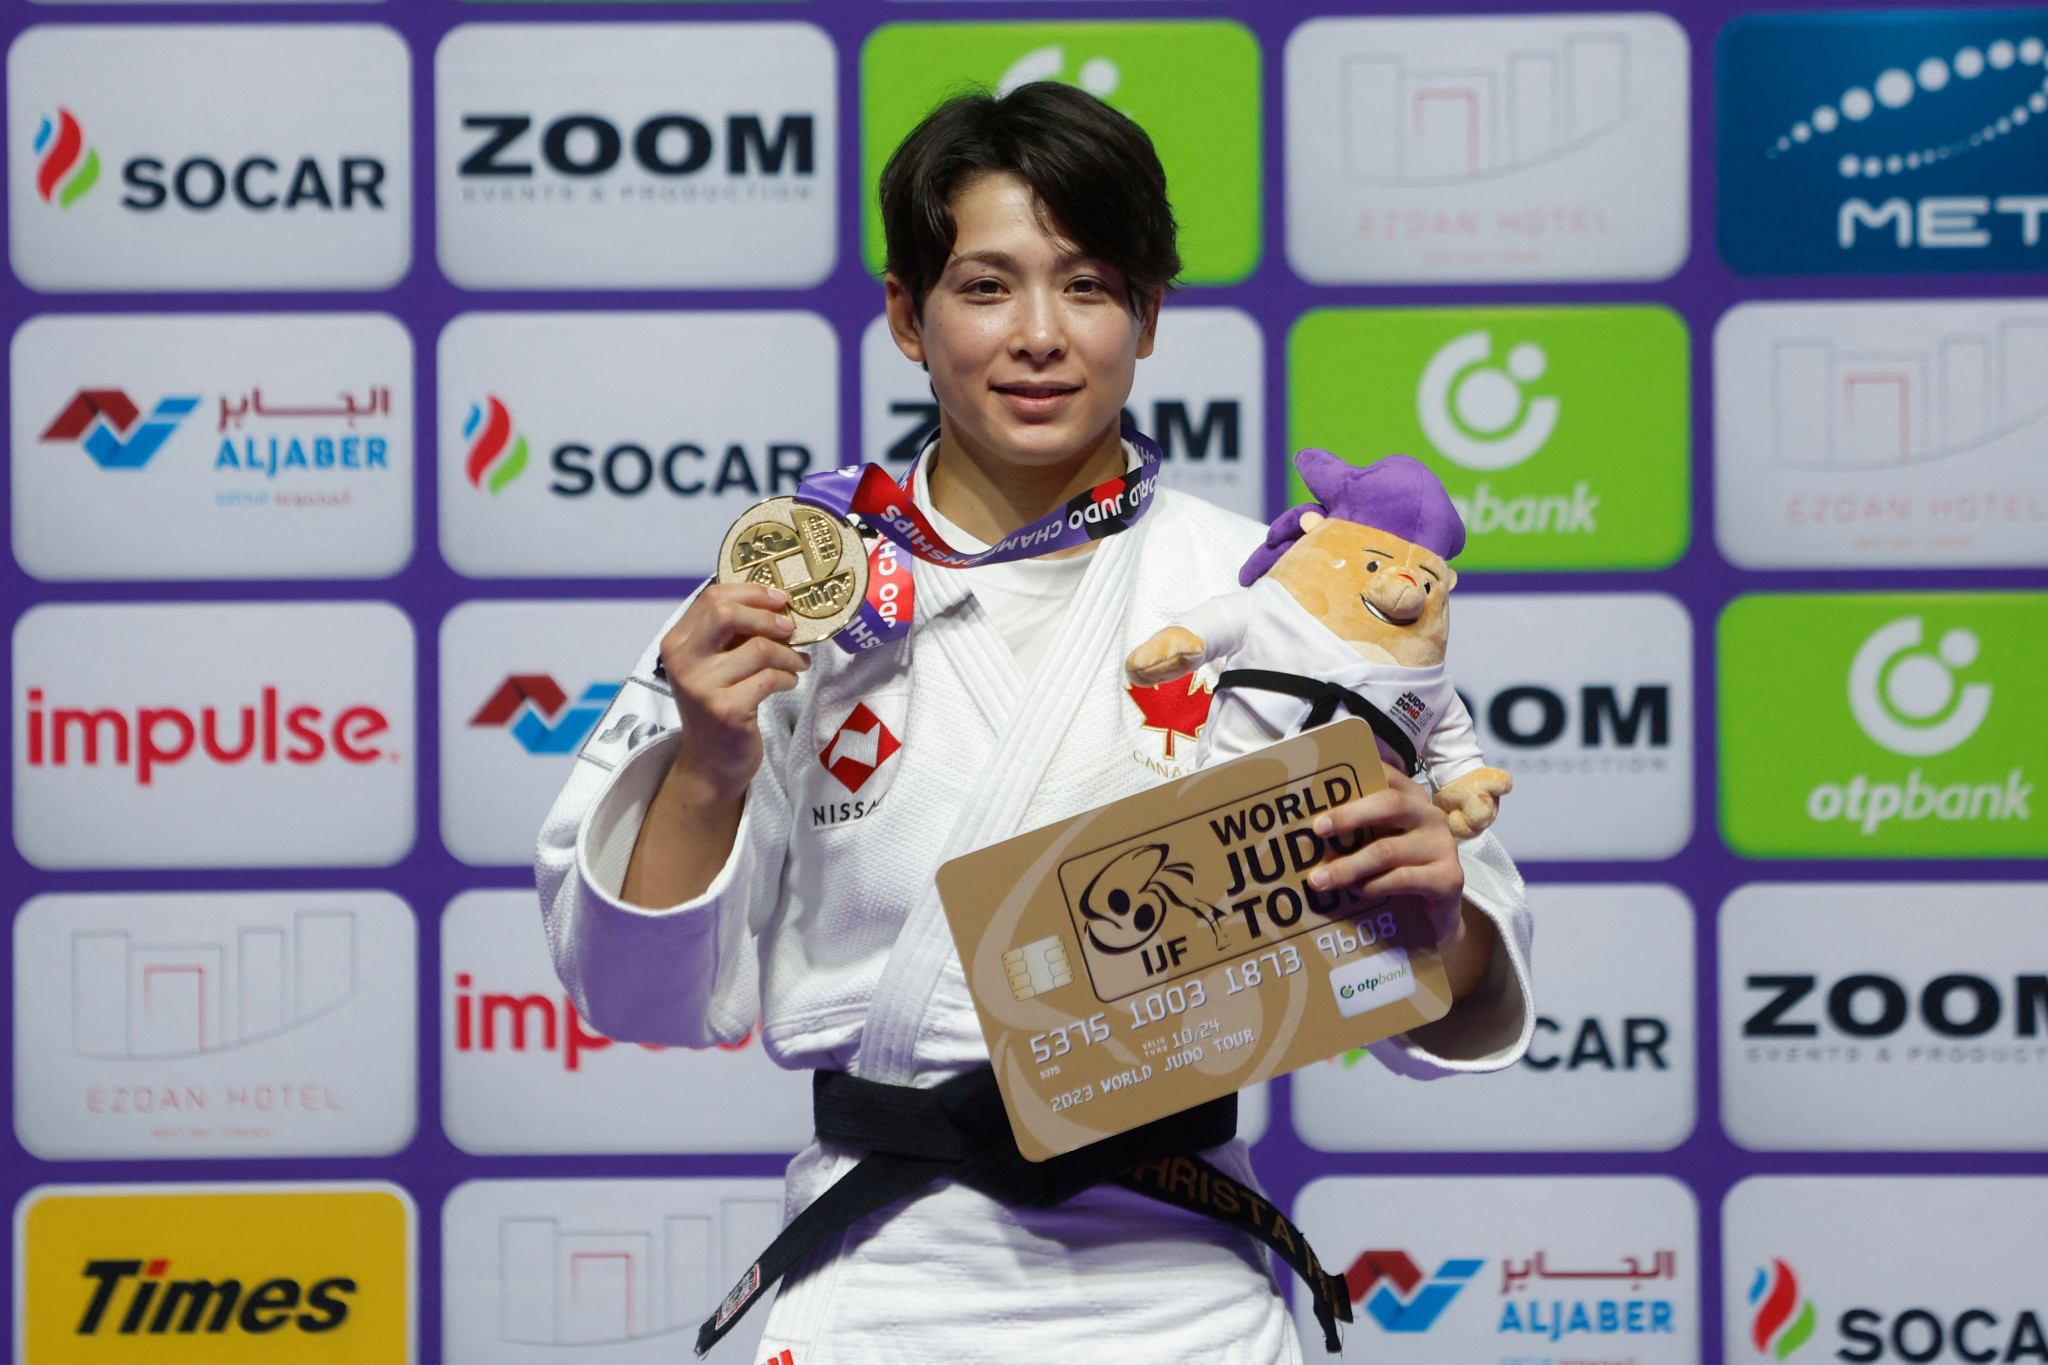 Canada’s Christa Deguchi became a two-time world champion after winning the women's under-57kg title, adding to her 2019 crown ©Getty Images